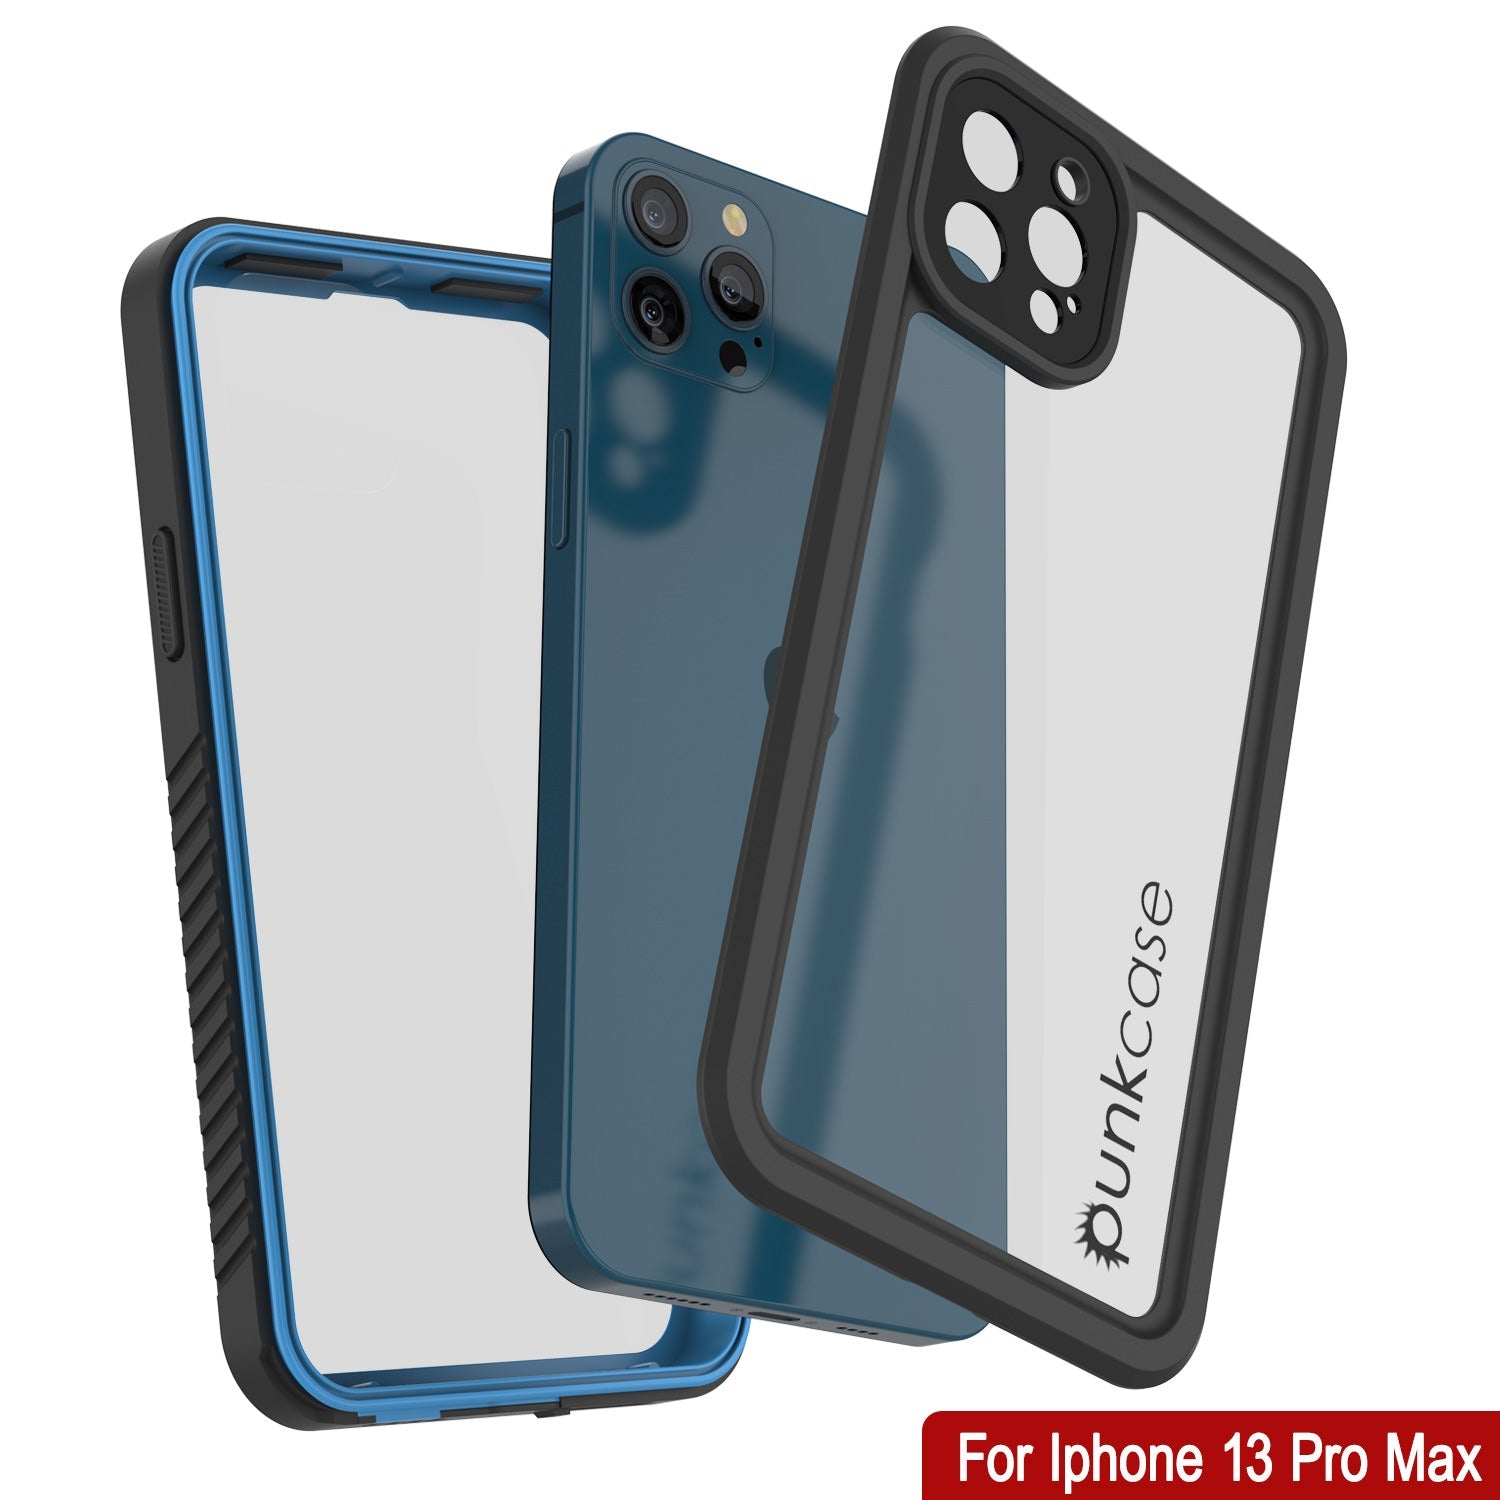 iPhone 13 Pro Max  Waterproof Case, Punkcase [Extreme Series] Armor Cover W/ Built In Screen Protector [Light Blue]